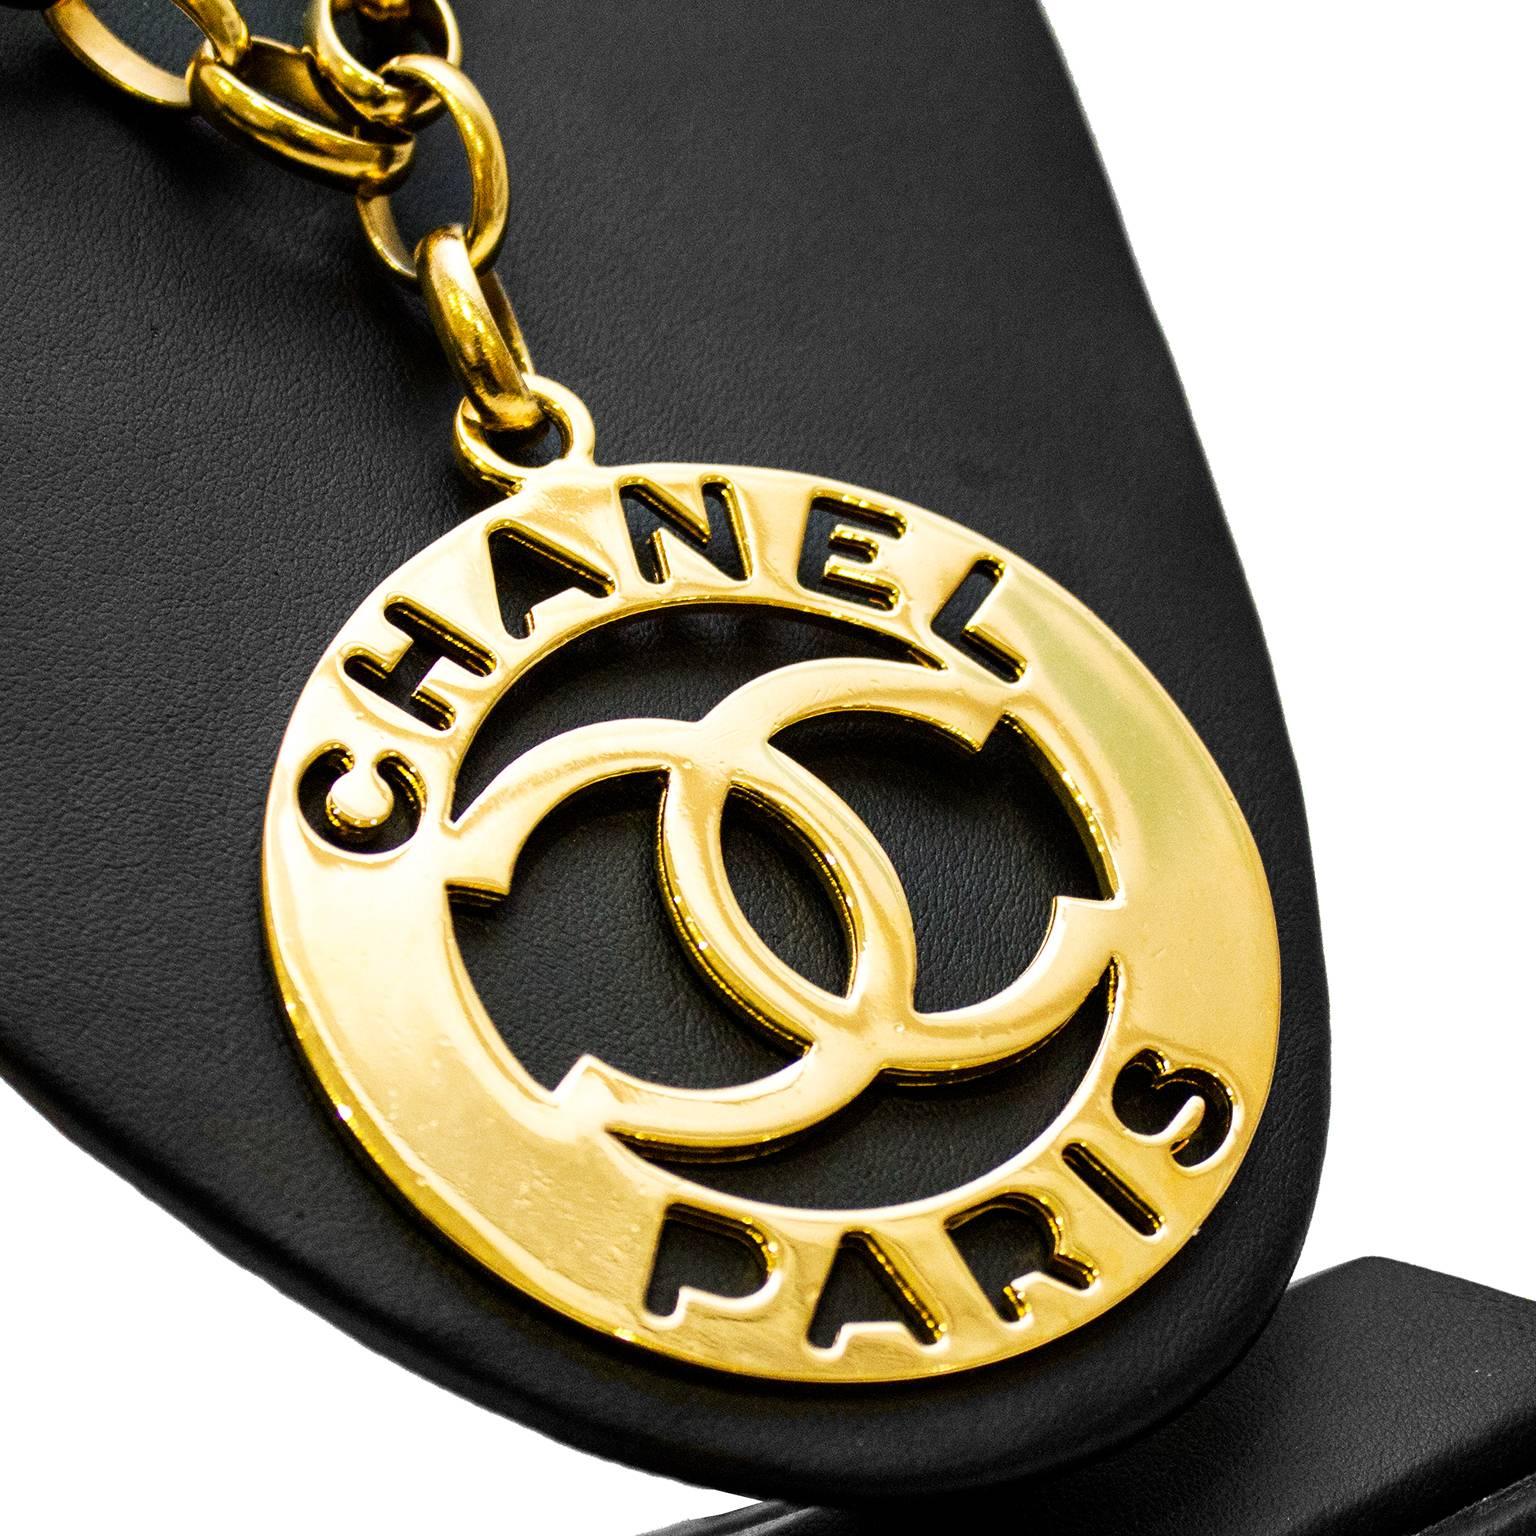 Striking 1980's gold tone Chanel necklace featuring an oversized logo pendant. Necklace has a very contemporary look and feel. Chanel marking at clasp. Show stopping, conversation piece. Excellent vintage condition.

Length 20